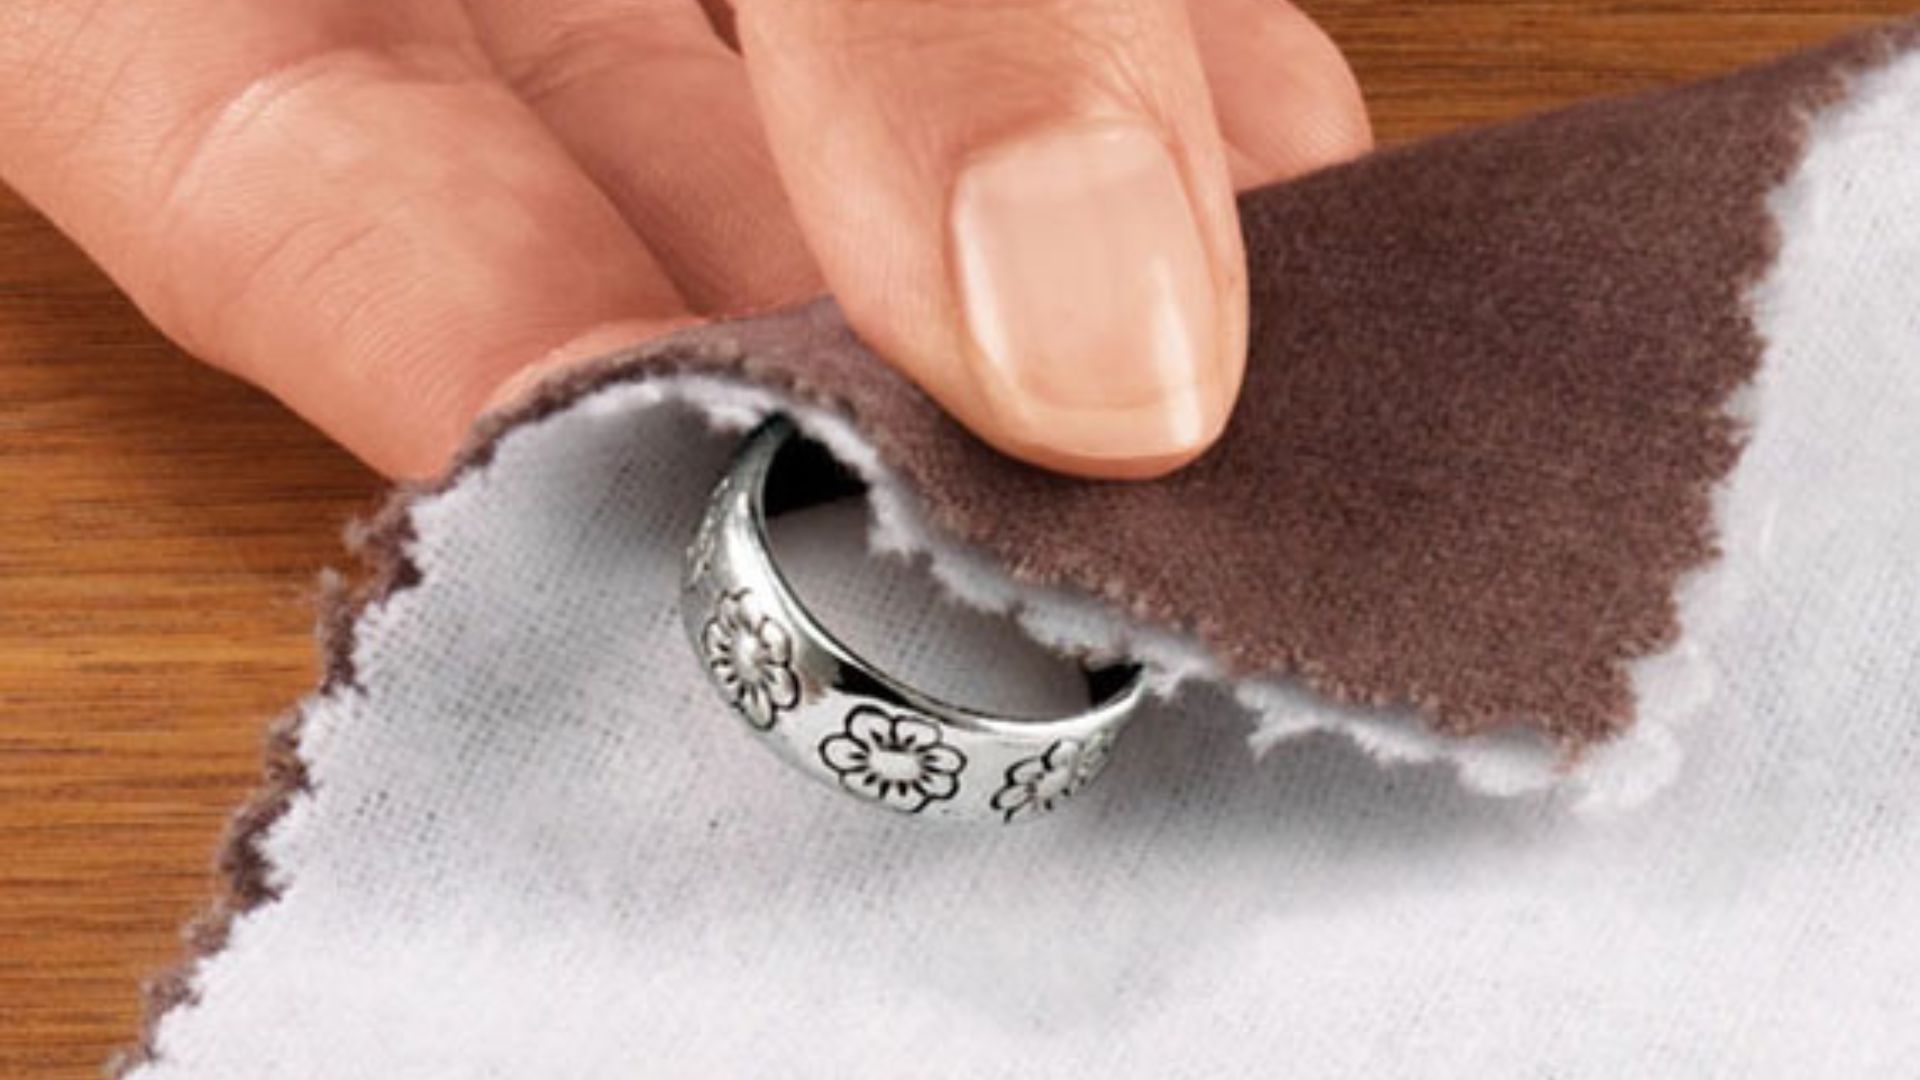 Cleaning Silver Ring With Towel